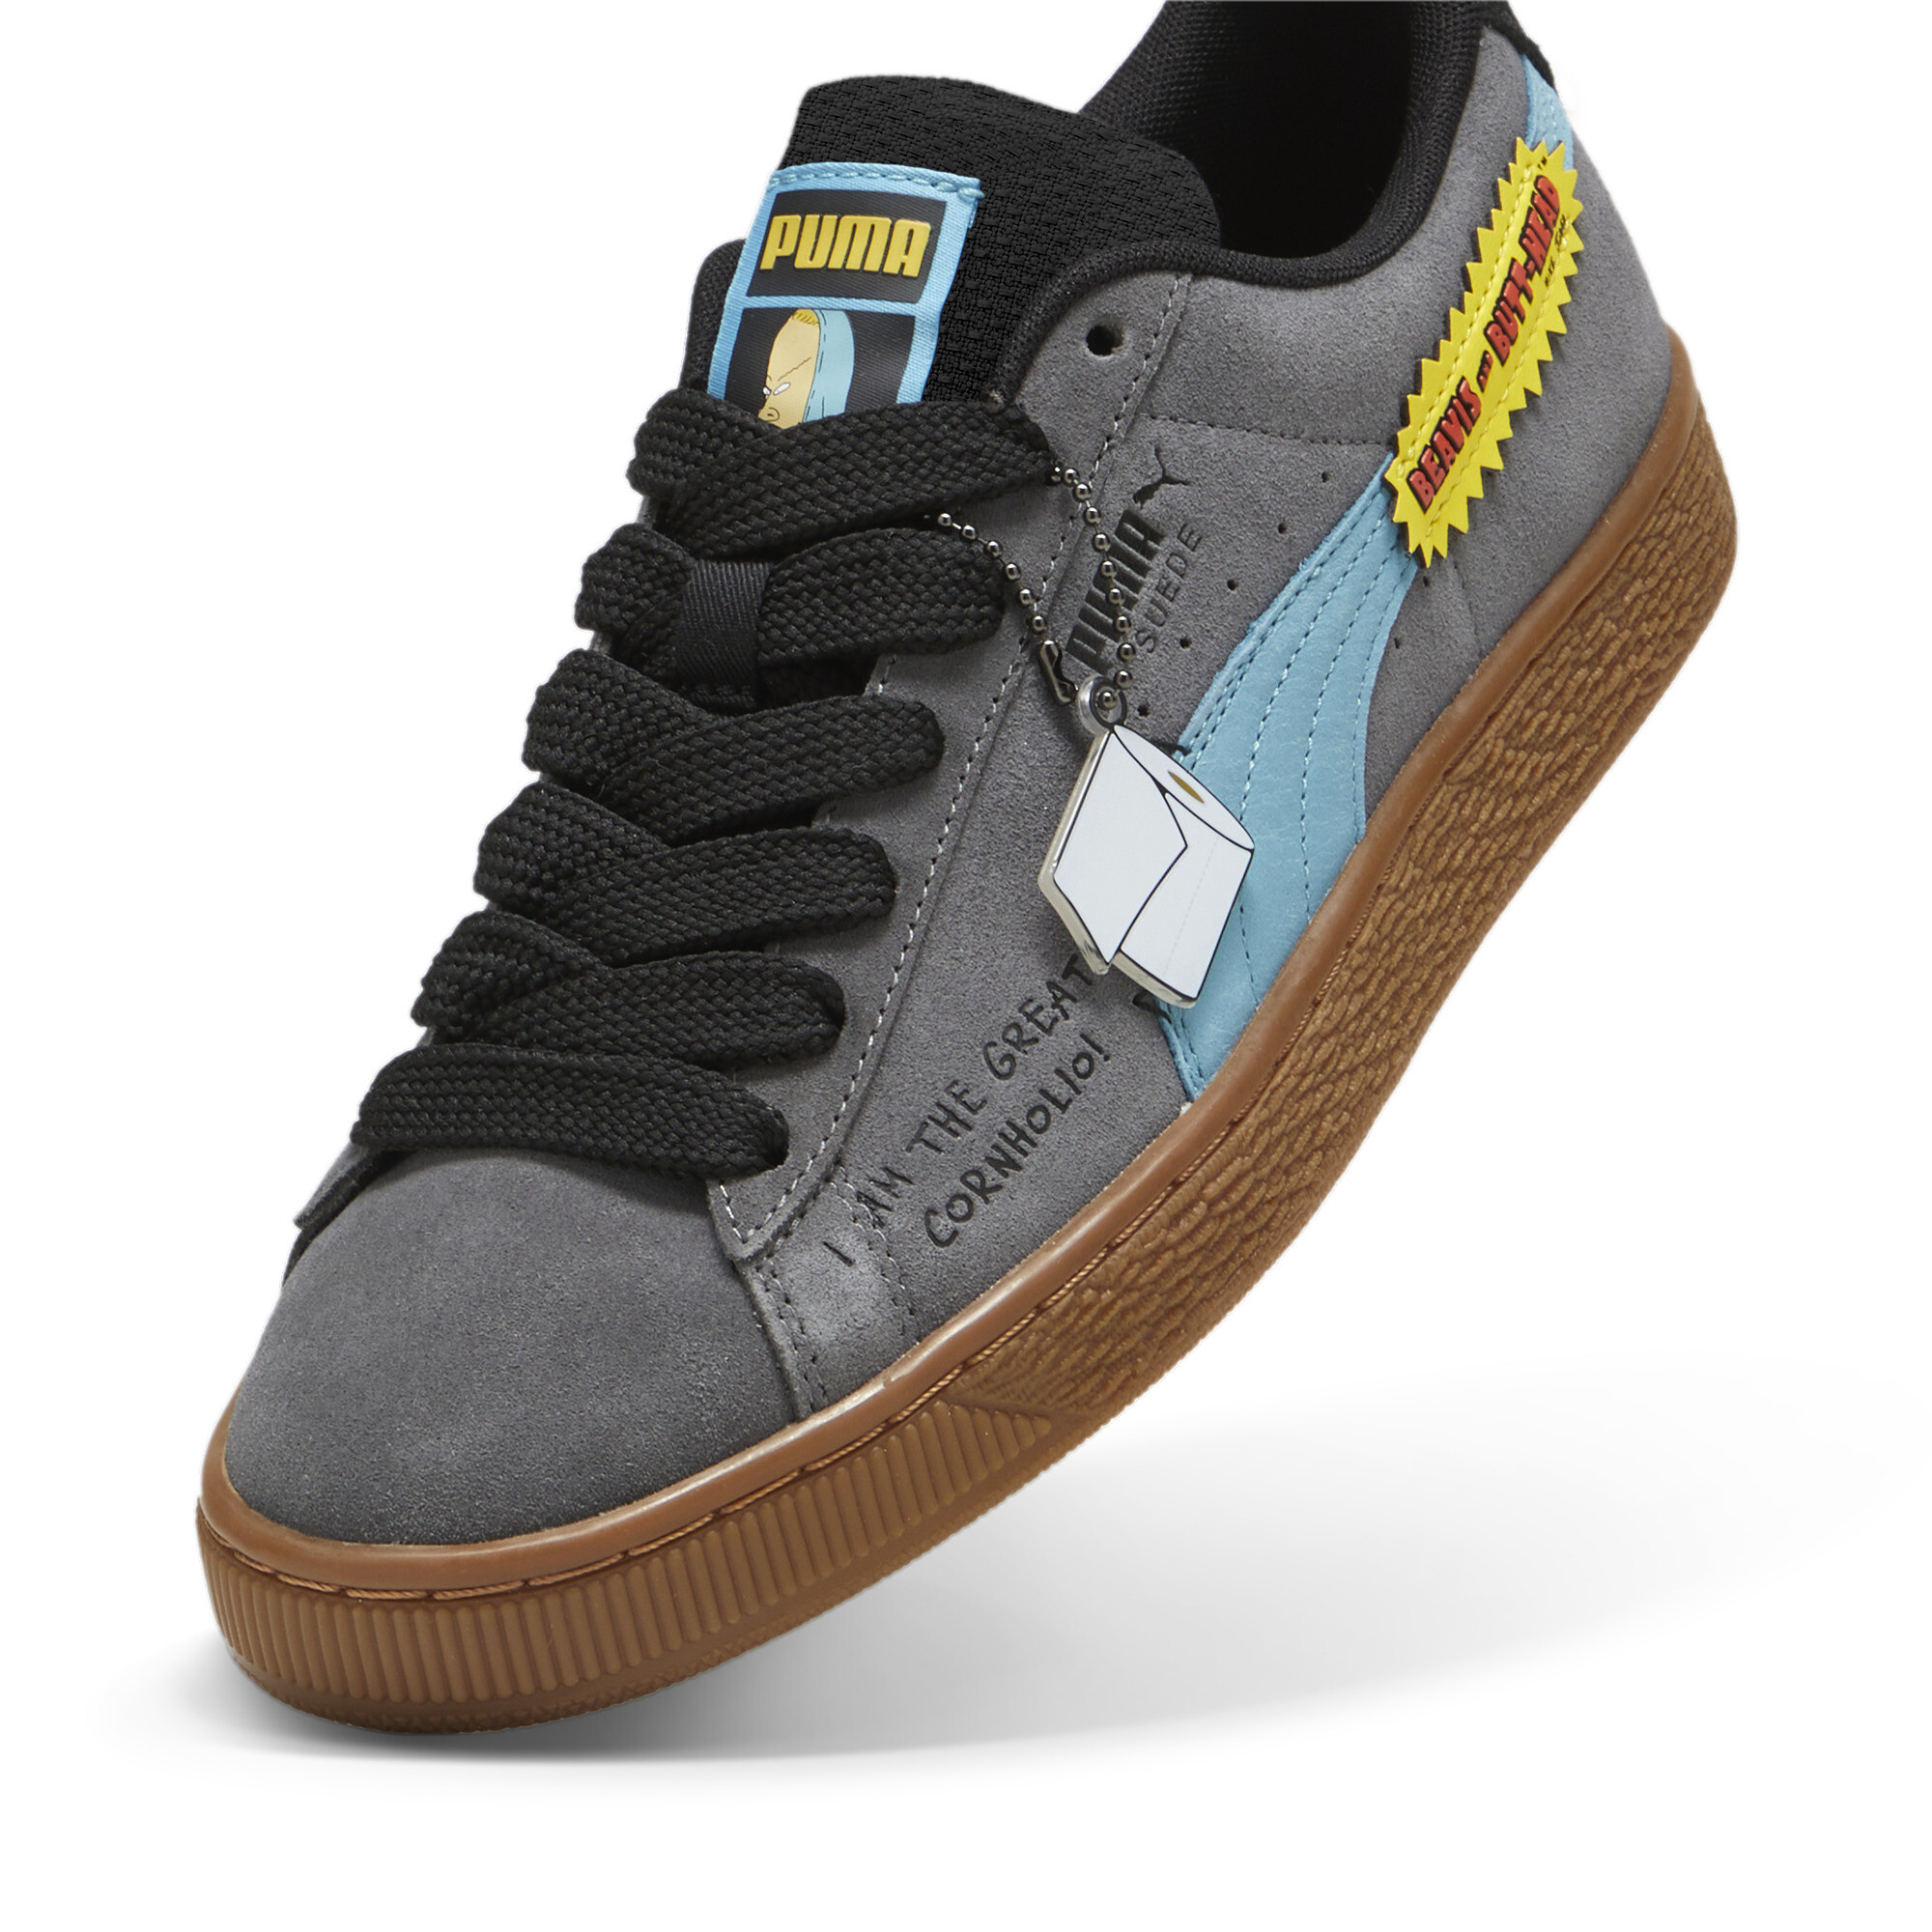 Kids' PUMA X BEAVIS AND BUTTHEAD Suede Sneakers In Gray, Size EU 38